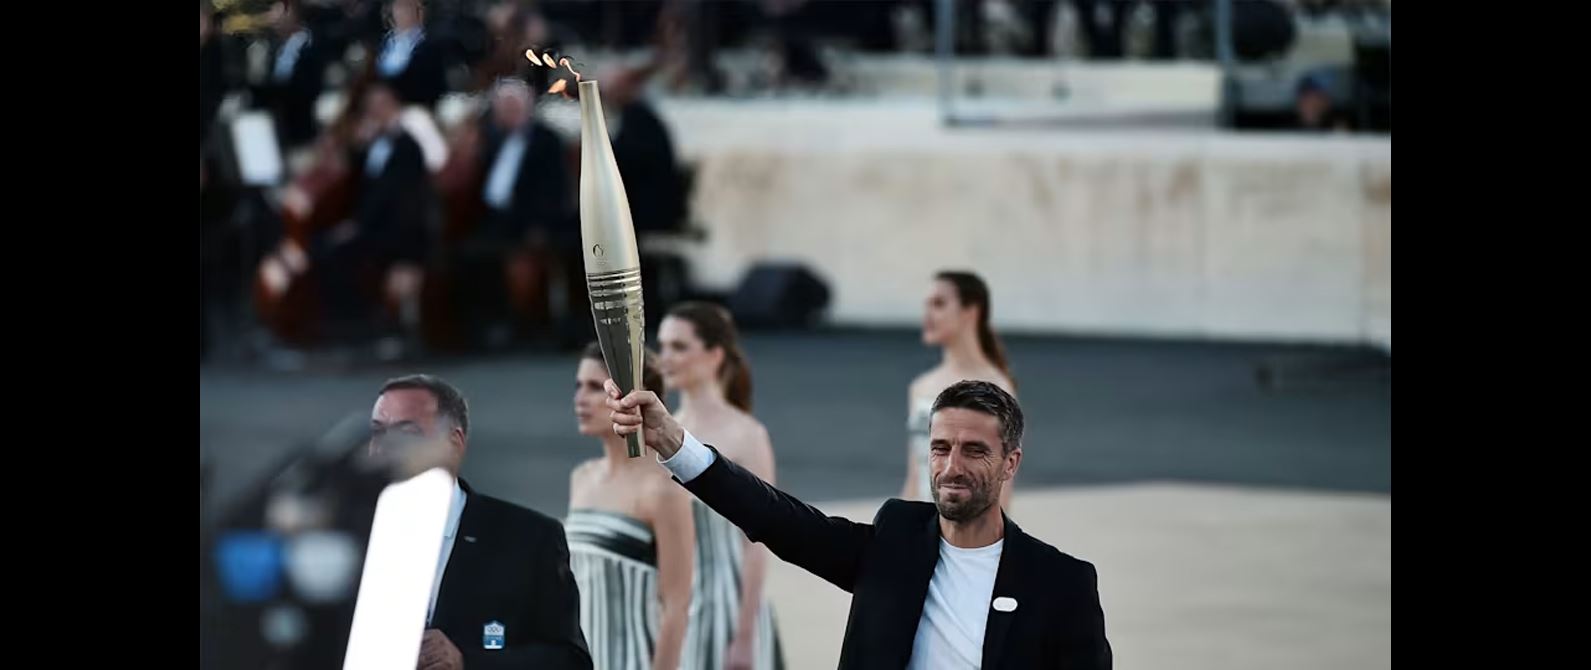 Olympic flame handover ceremony marks transition from Greece to Paris 2024